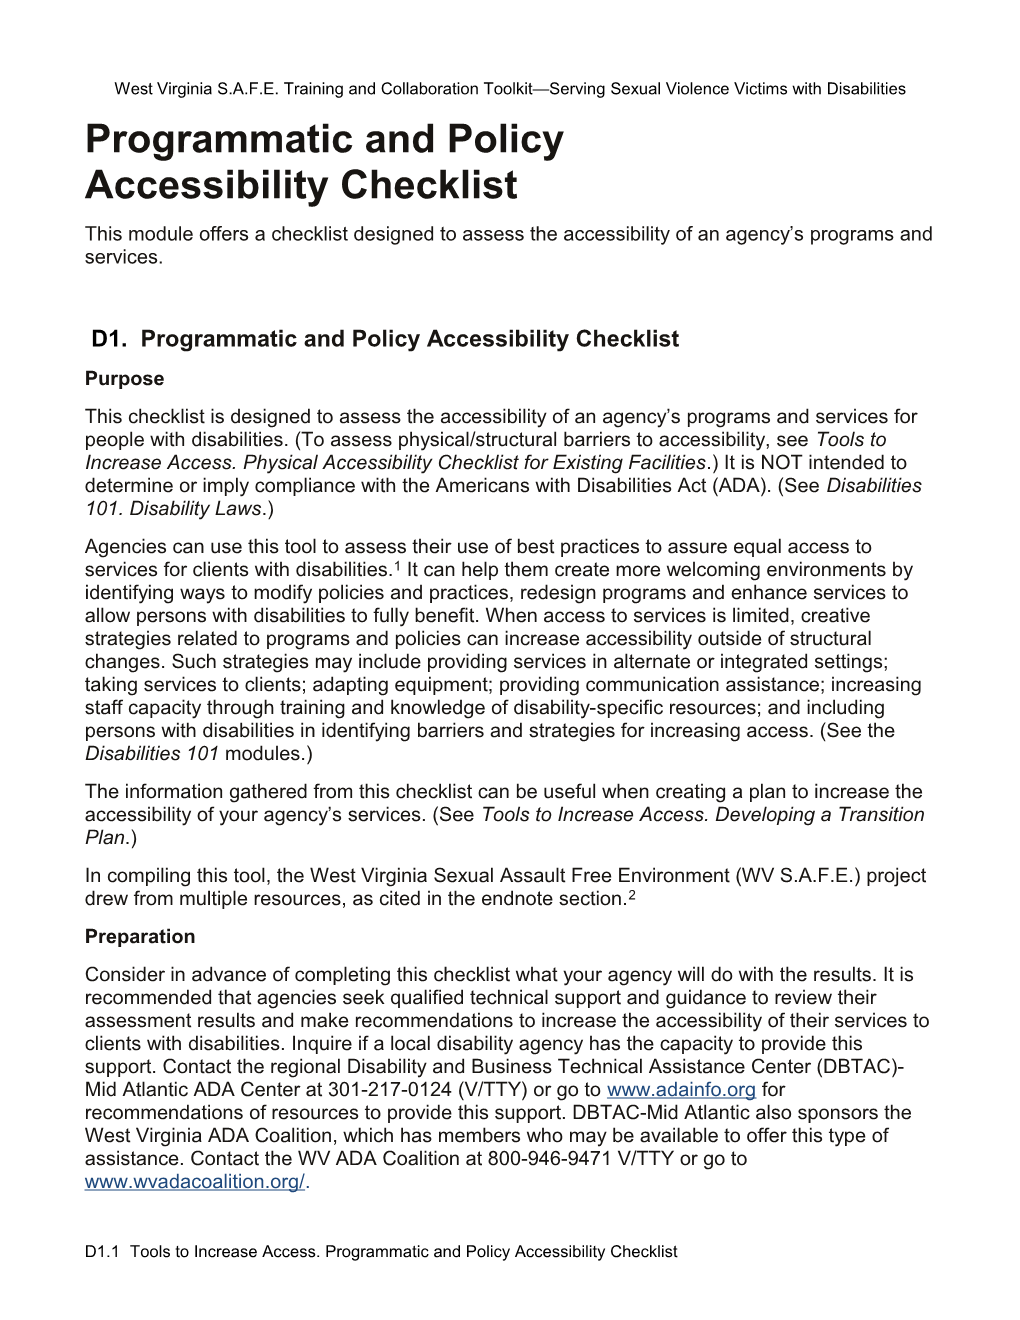 D1. Tools to Increase Access. Programmatic and Policy Accessibility Checklist